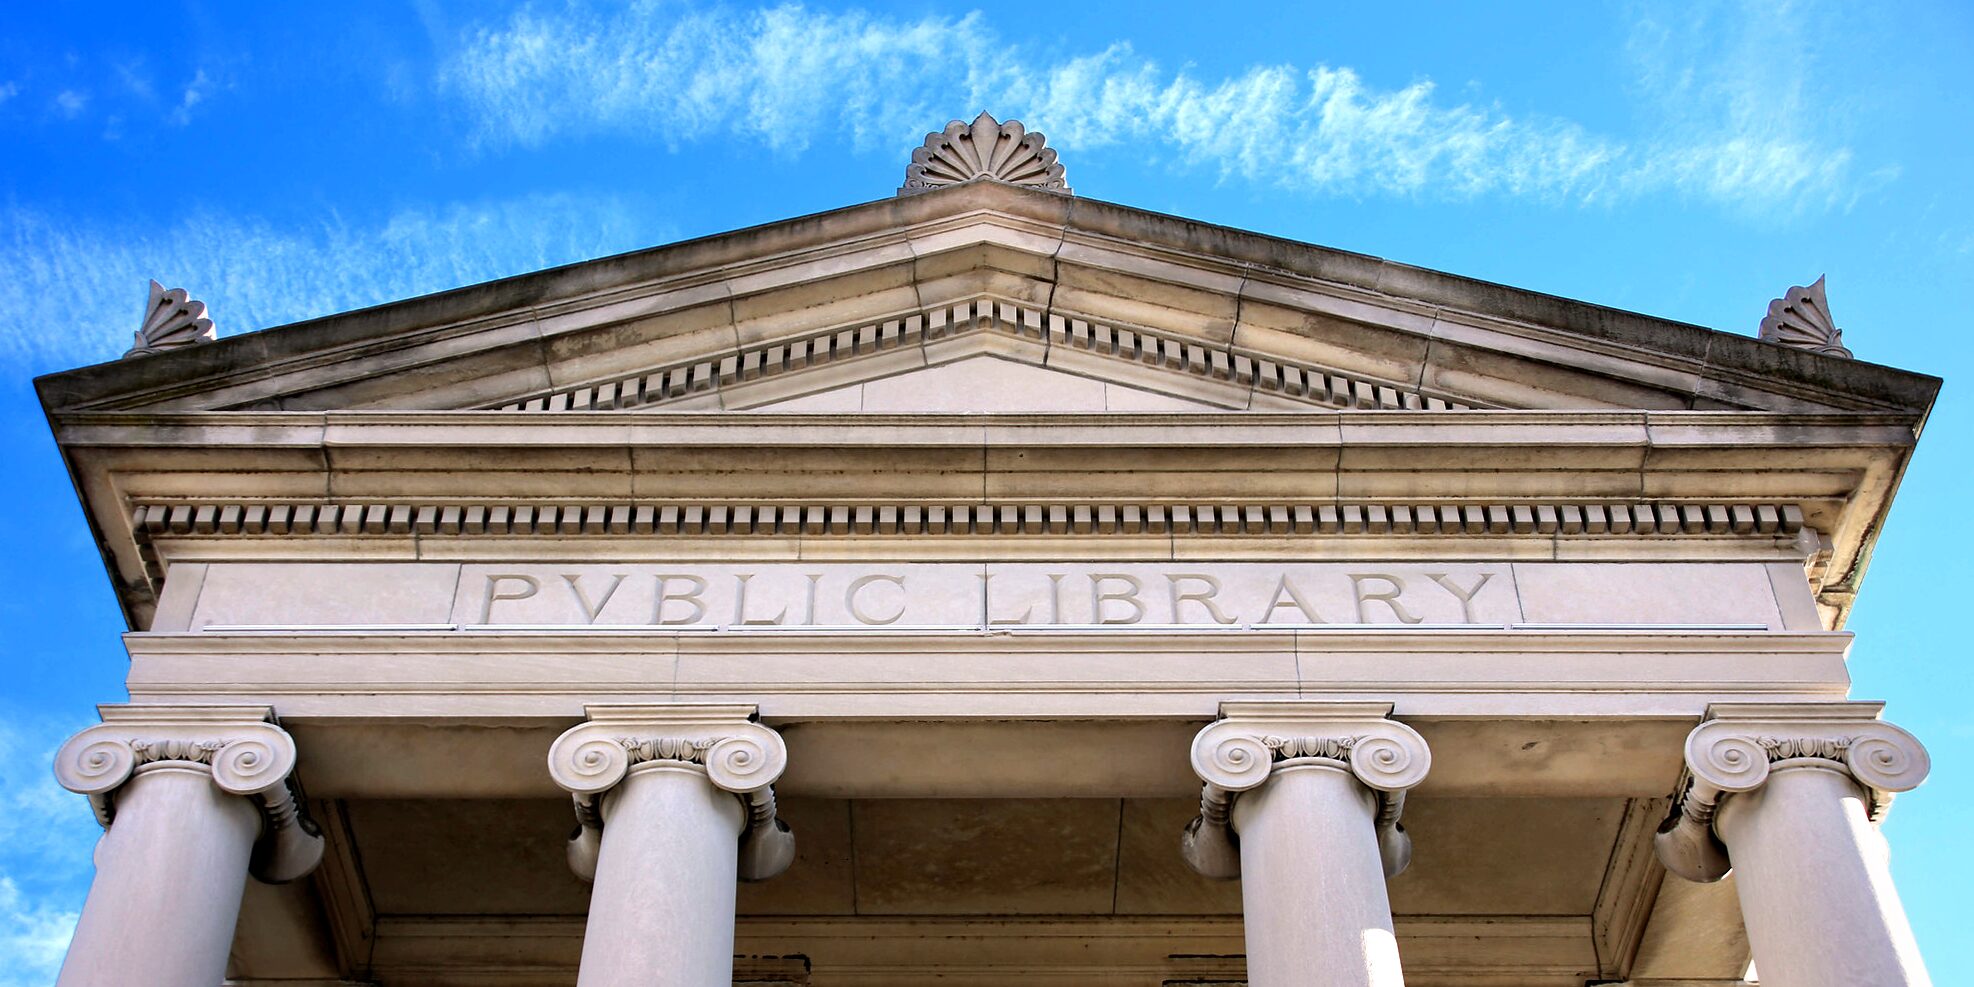 The Carondelet Branch of the St. Louis Public Library. Photo by Paul Sableman.